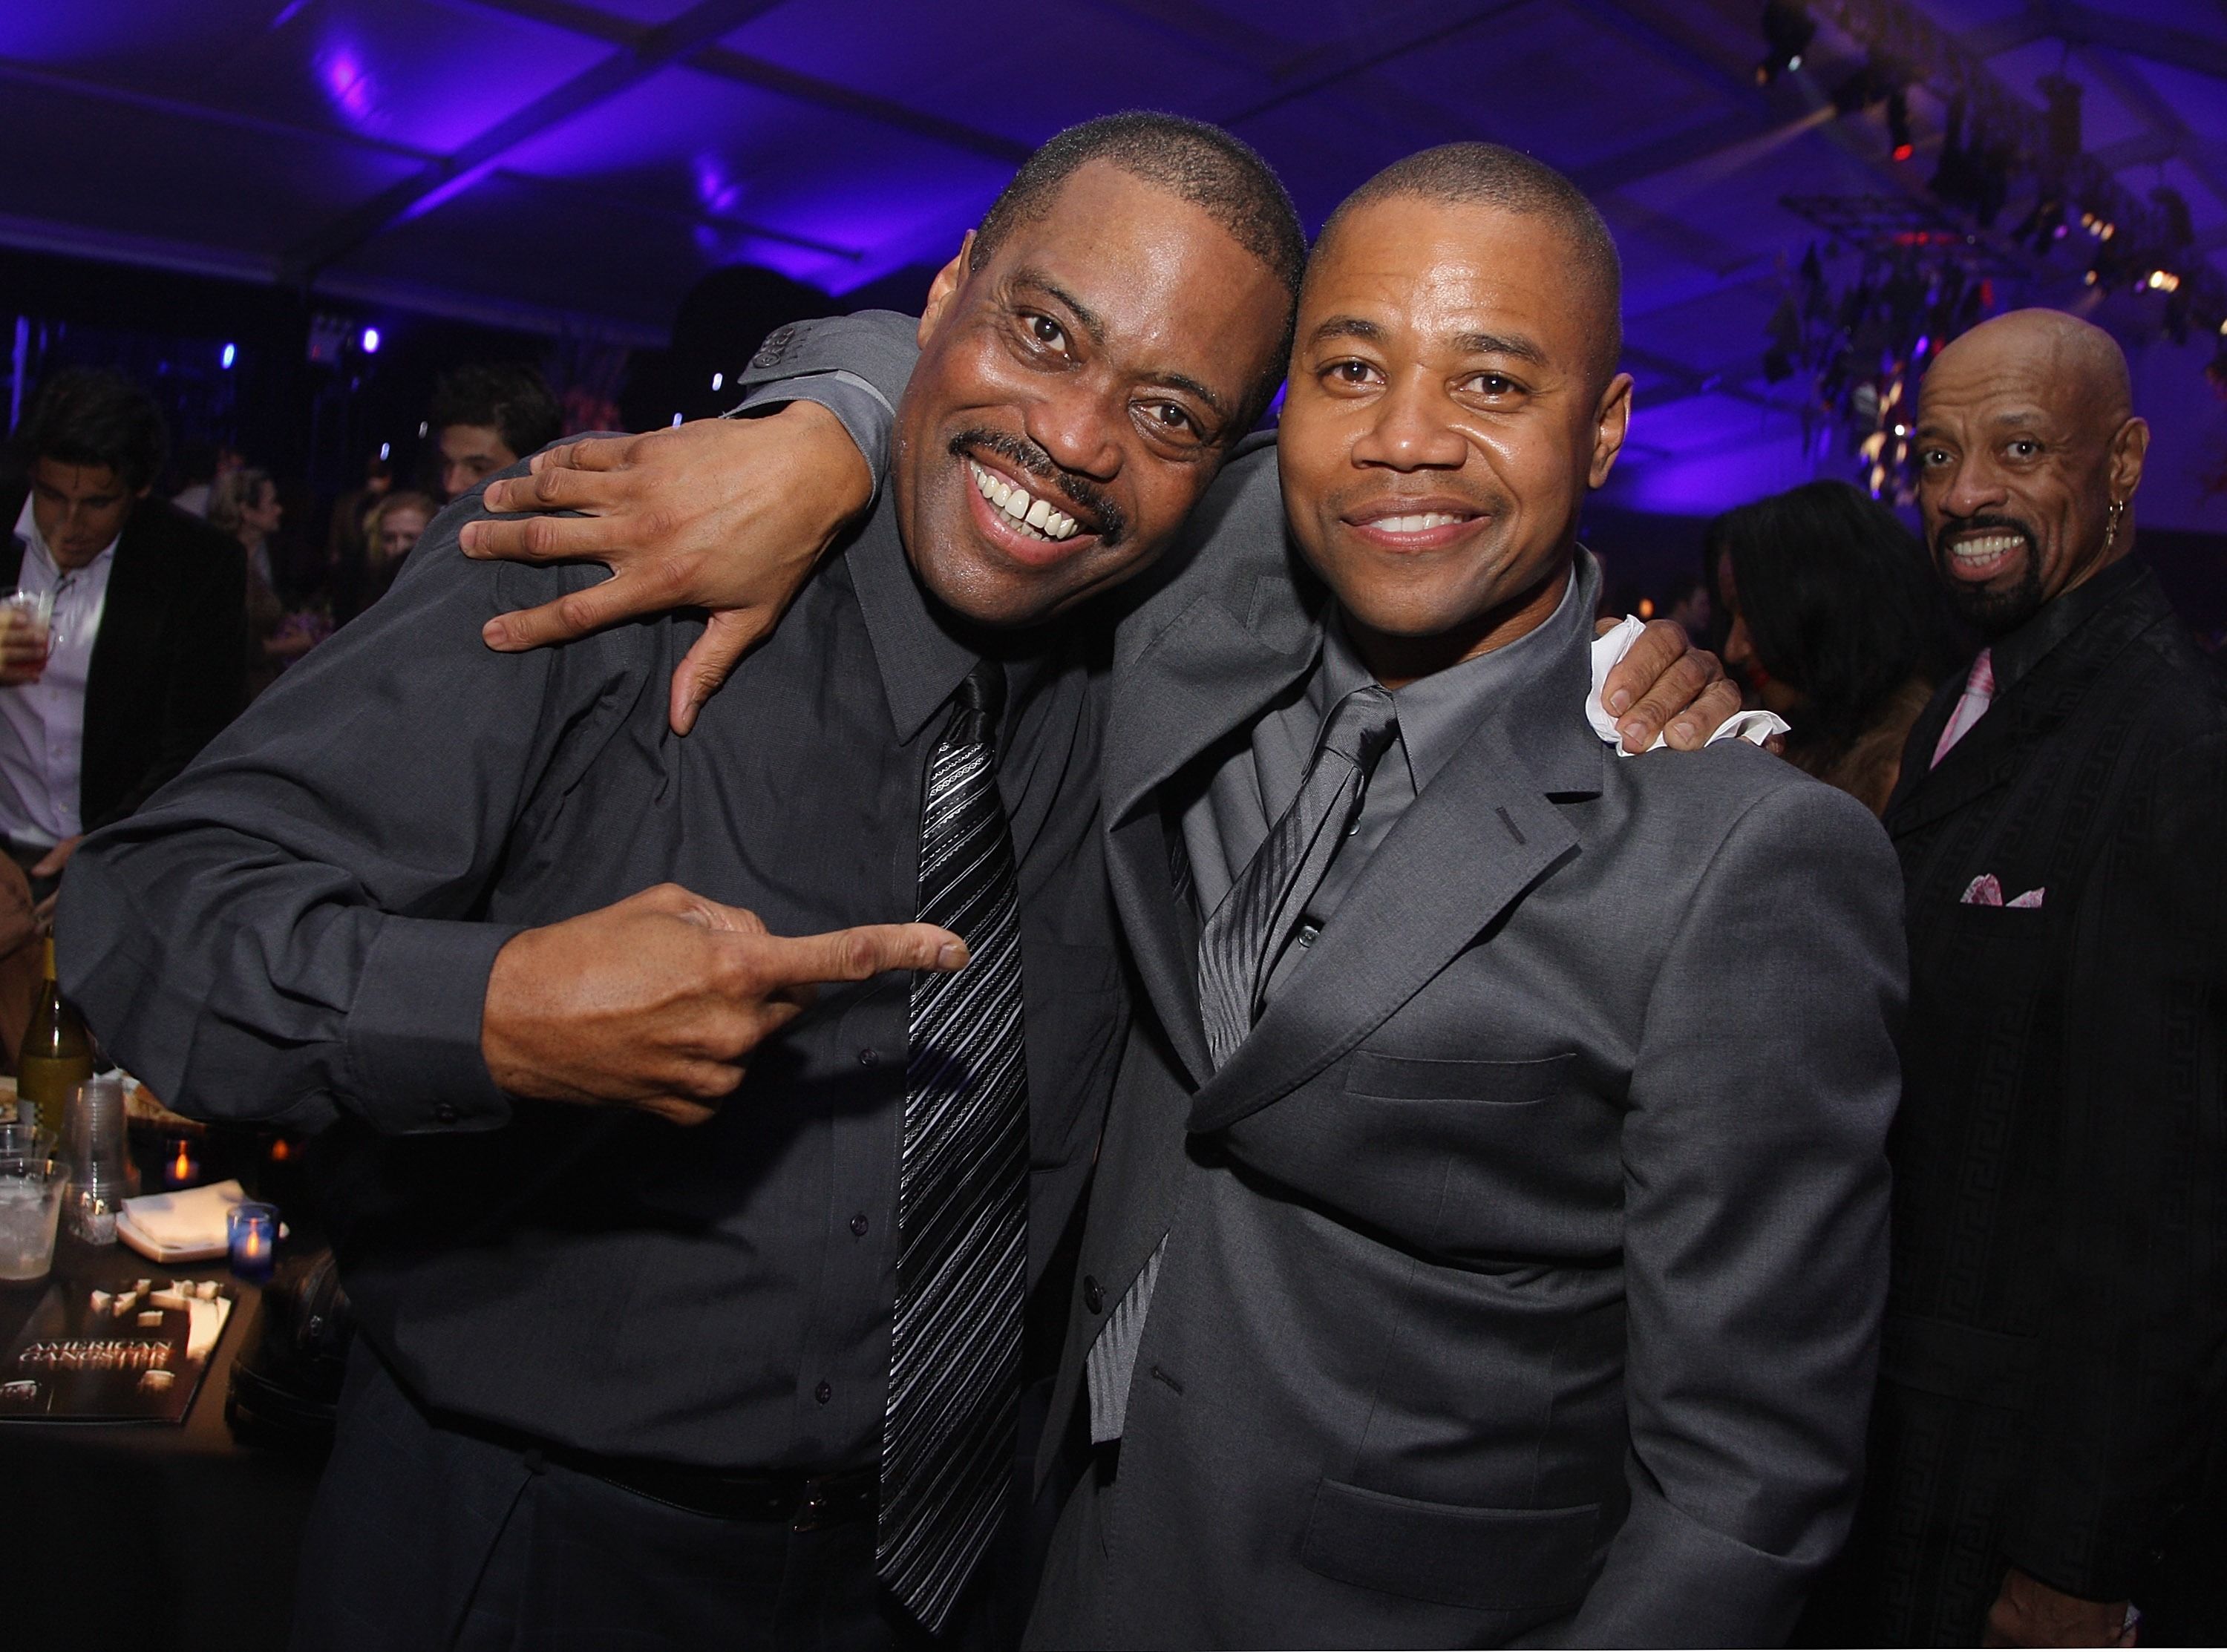 Cuba Gooding Sr. and actor Cuba Gooding Jr.attend the after-party of the world premiere of American Gangster at the Apollo Theater on October 19, 2007 in New York City | Photo: Getty Images